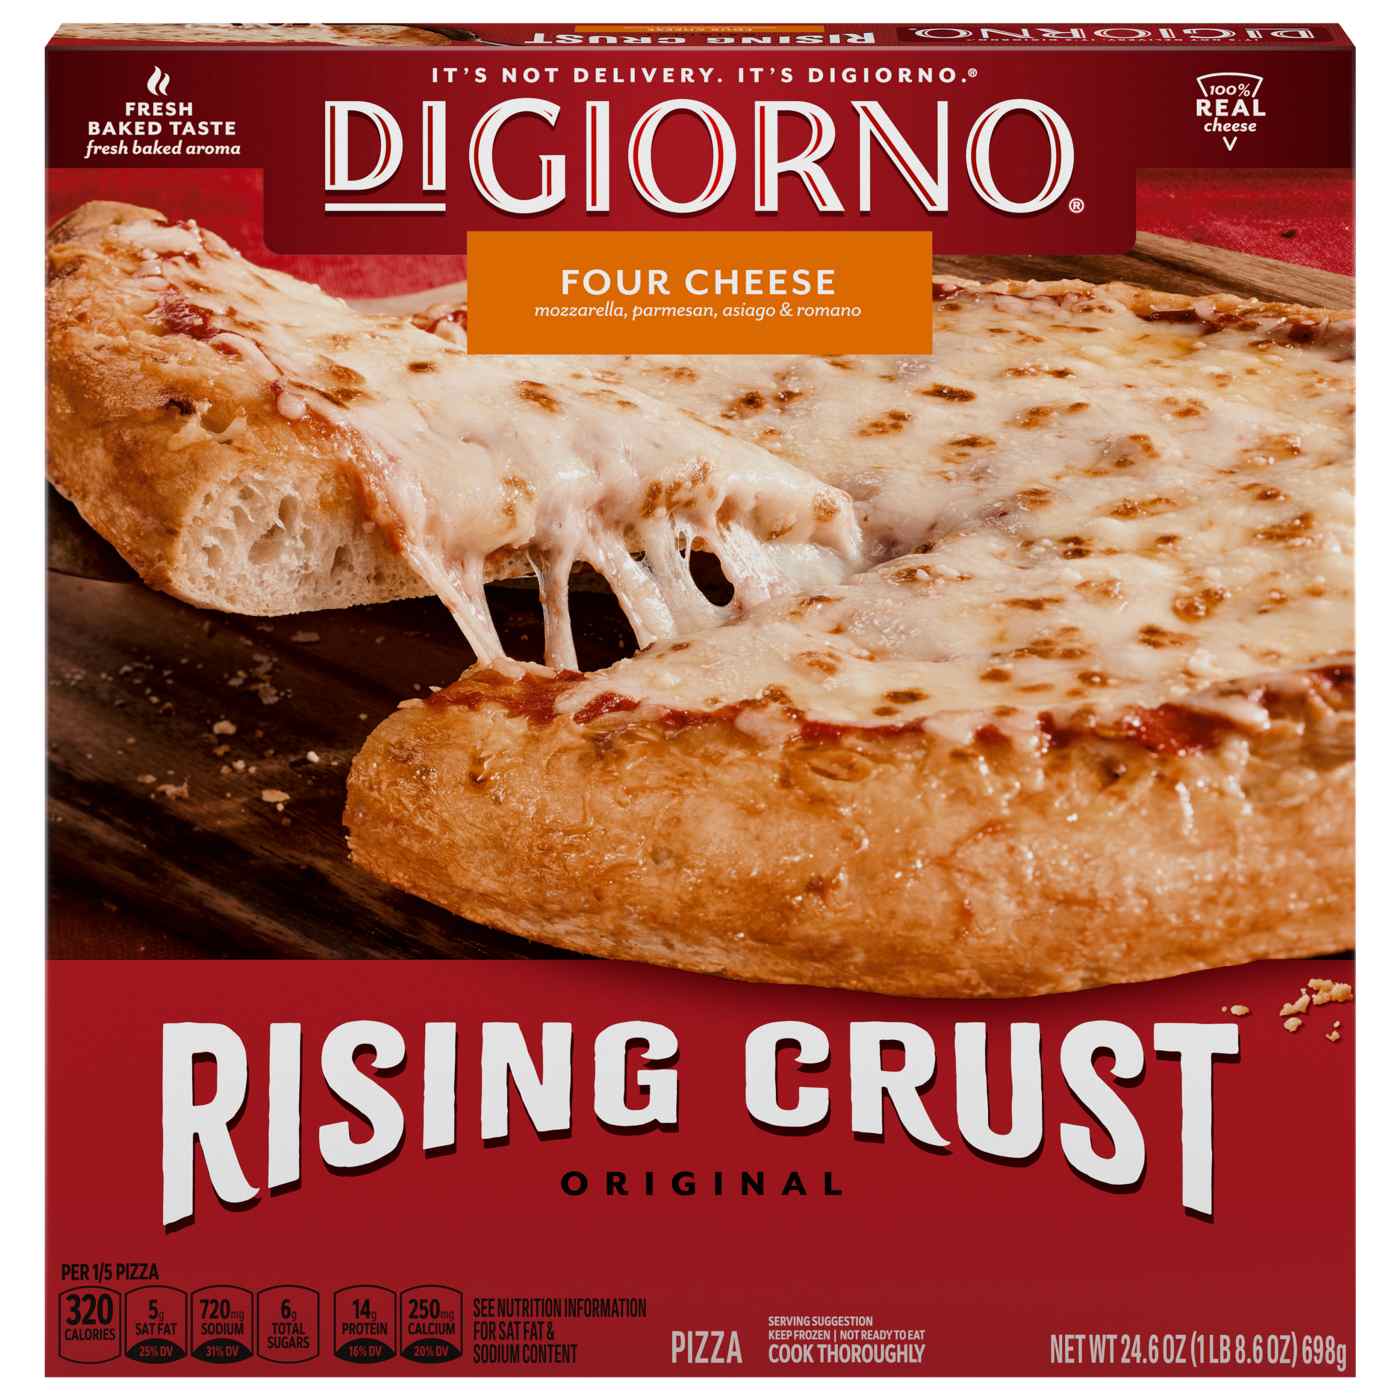 DiGiorno Rising Crust Frozen Pizza - Four Cheese; image 1 of 5